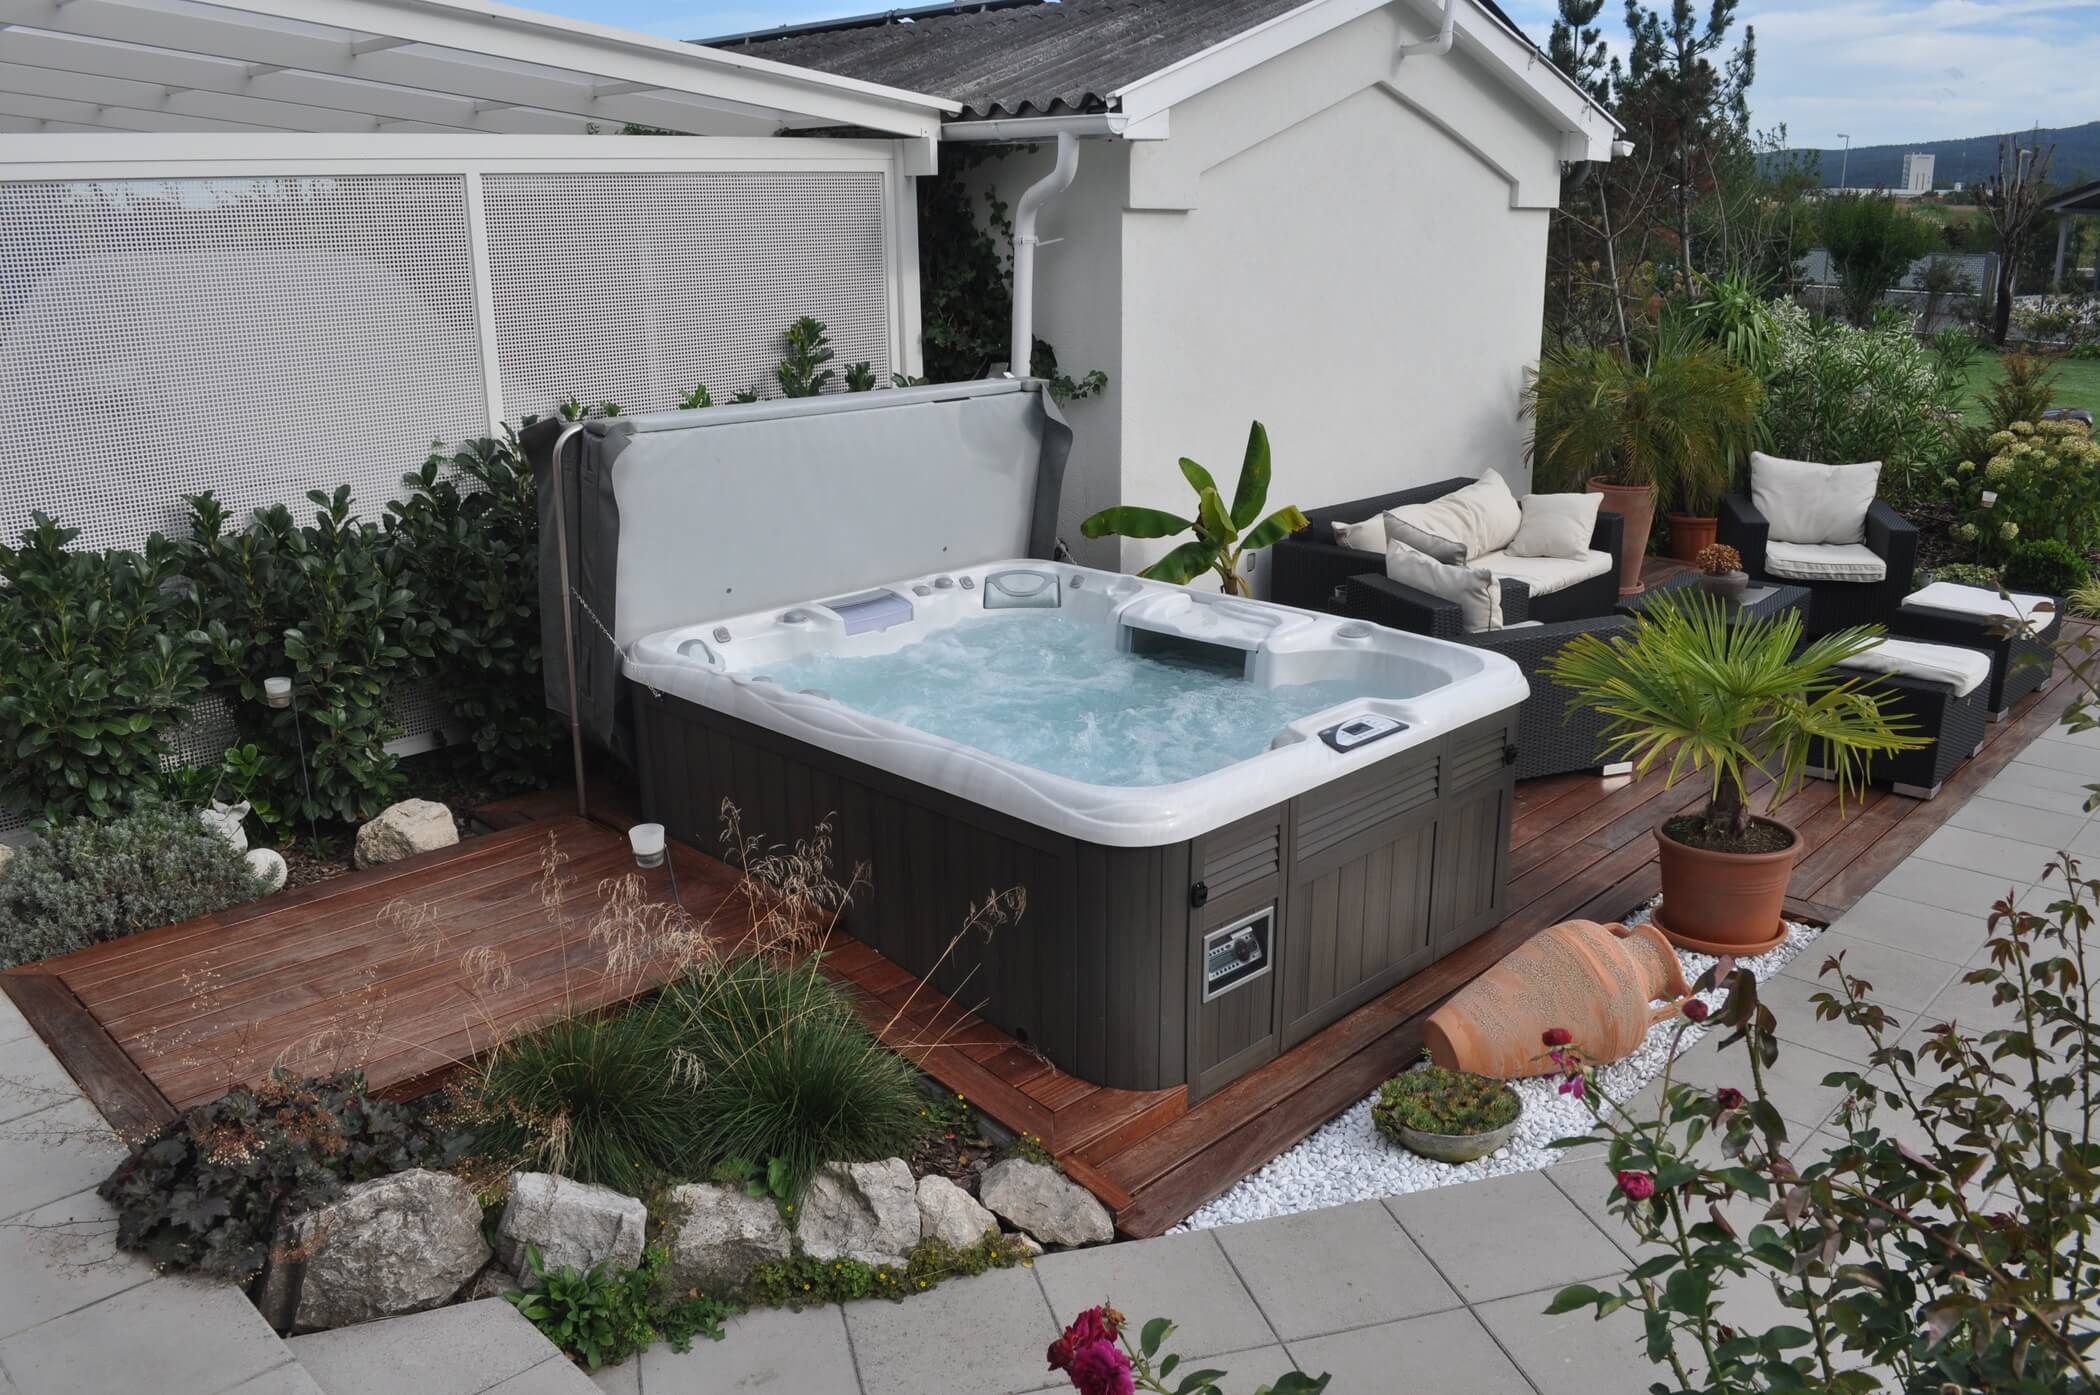 A hot tub on a wooden deck in a backyard.